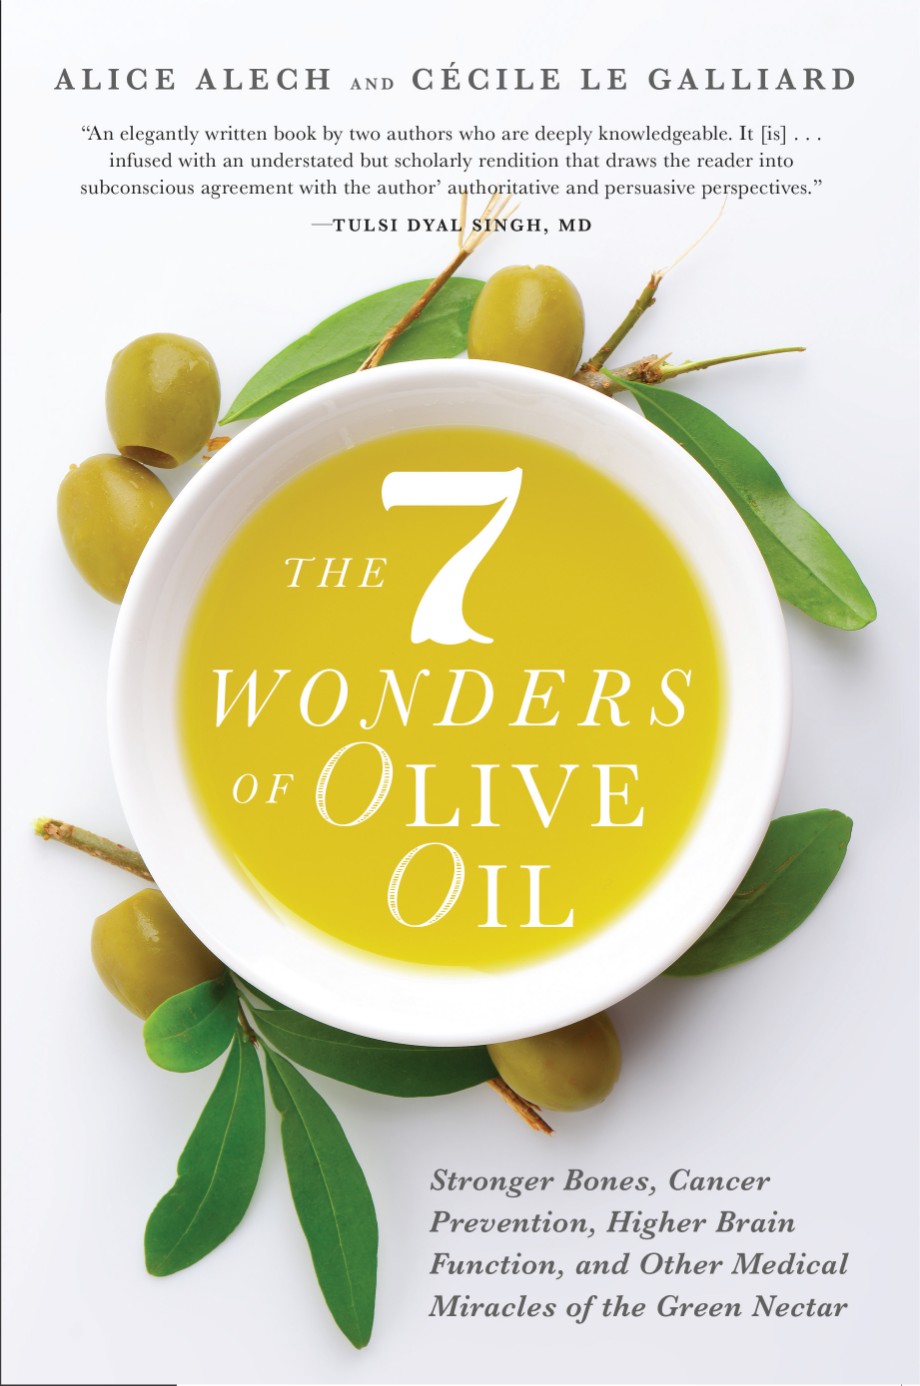 7 Wonders of Olive Oil Stronger Bones, Cancer Prevention, Higher Brain Function, and Other Medical Miracles of the Green Nectar